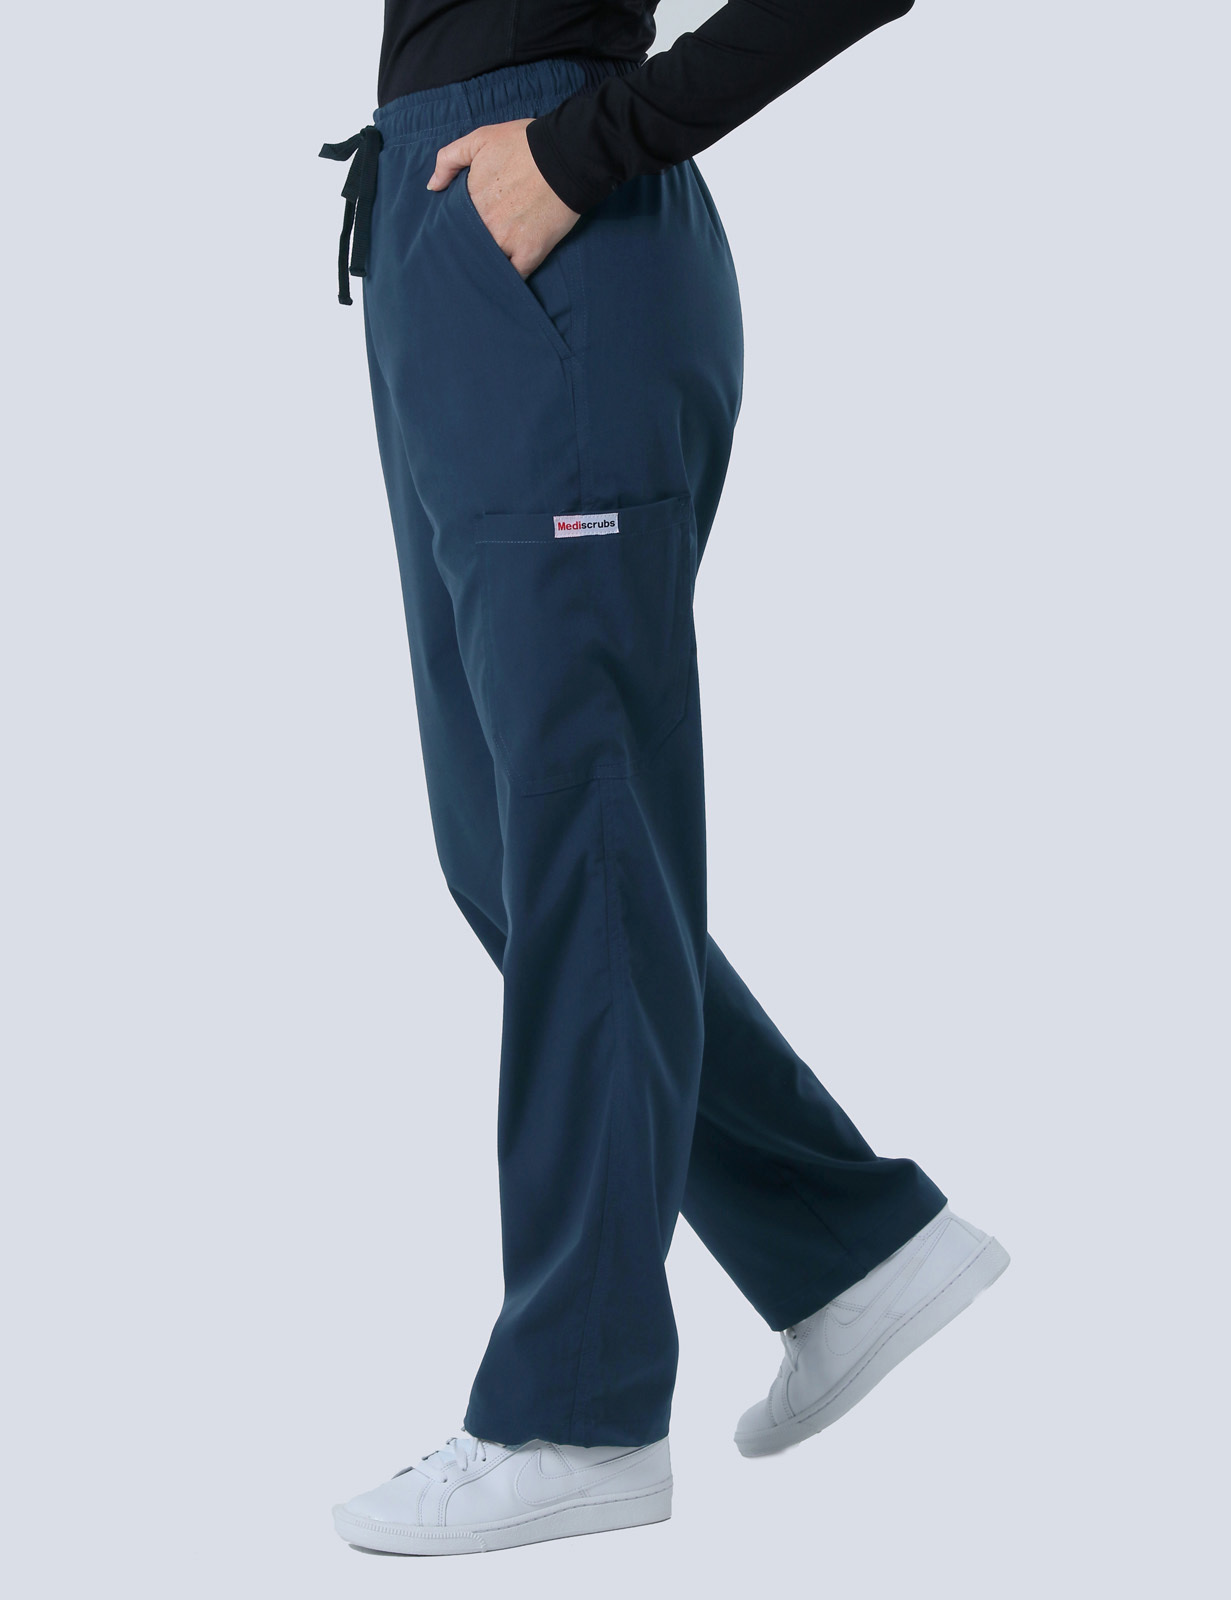 Prince Charles Hospital Cardiac Scientist Unit Uniform Set Bundle  (Women's Fit Solid Top and Cargo Pants in Navy + Logo) 